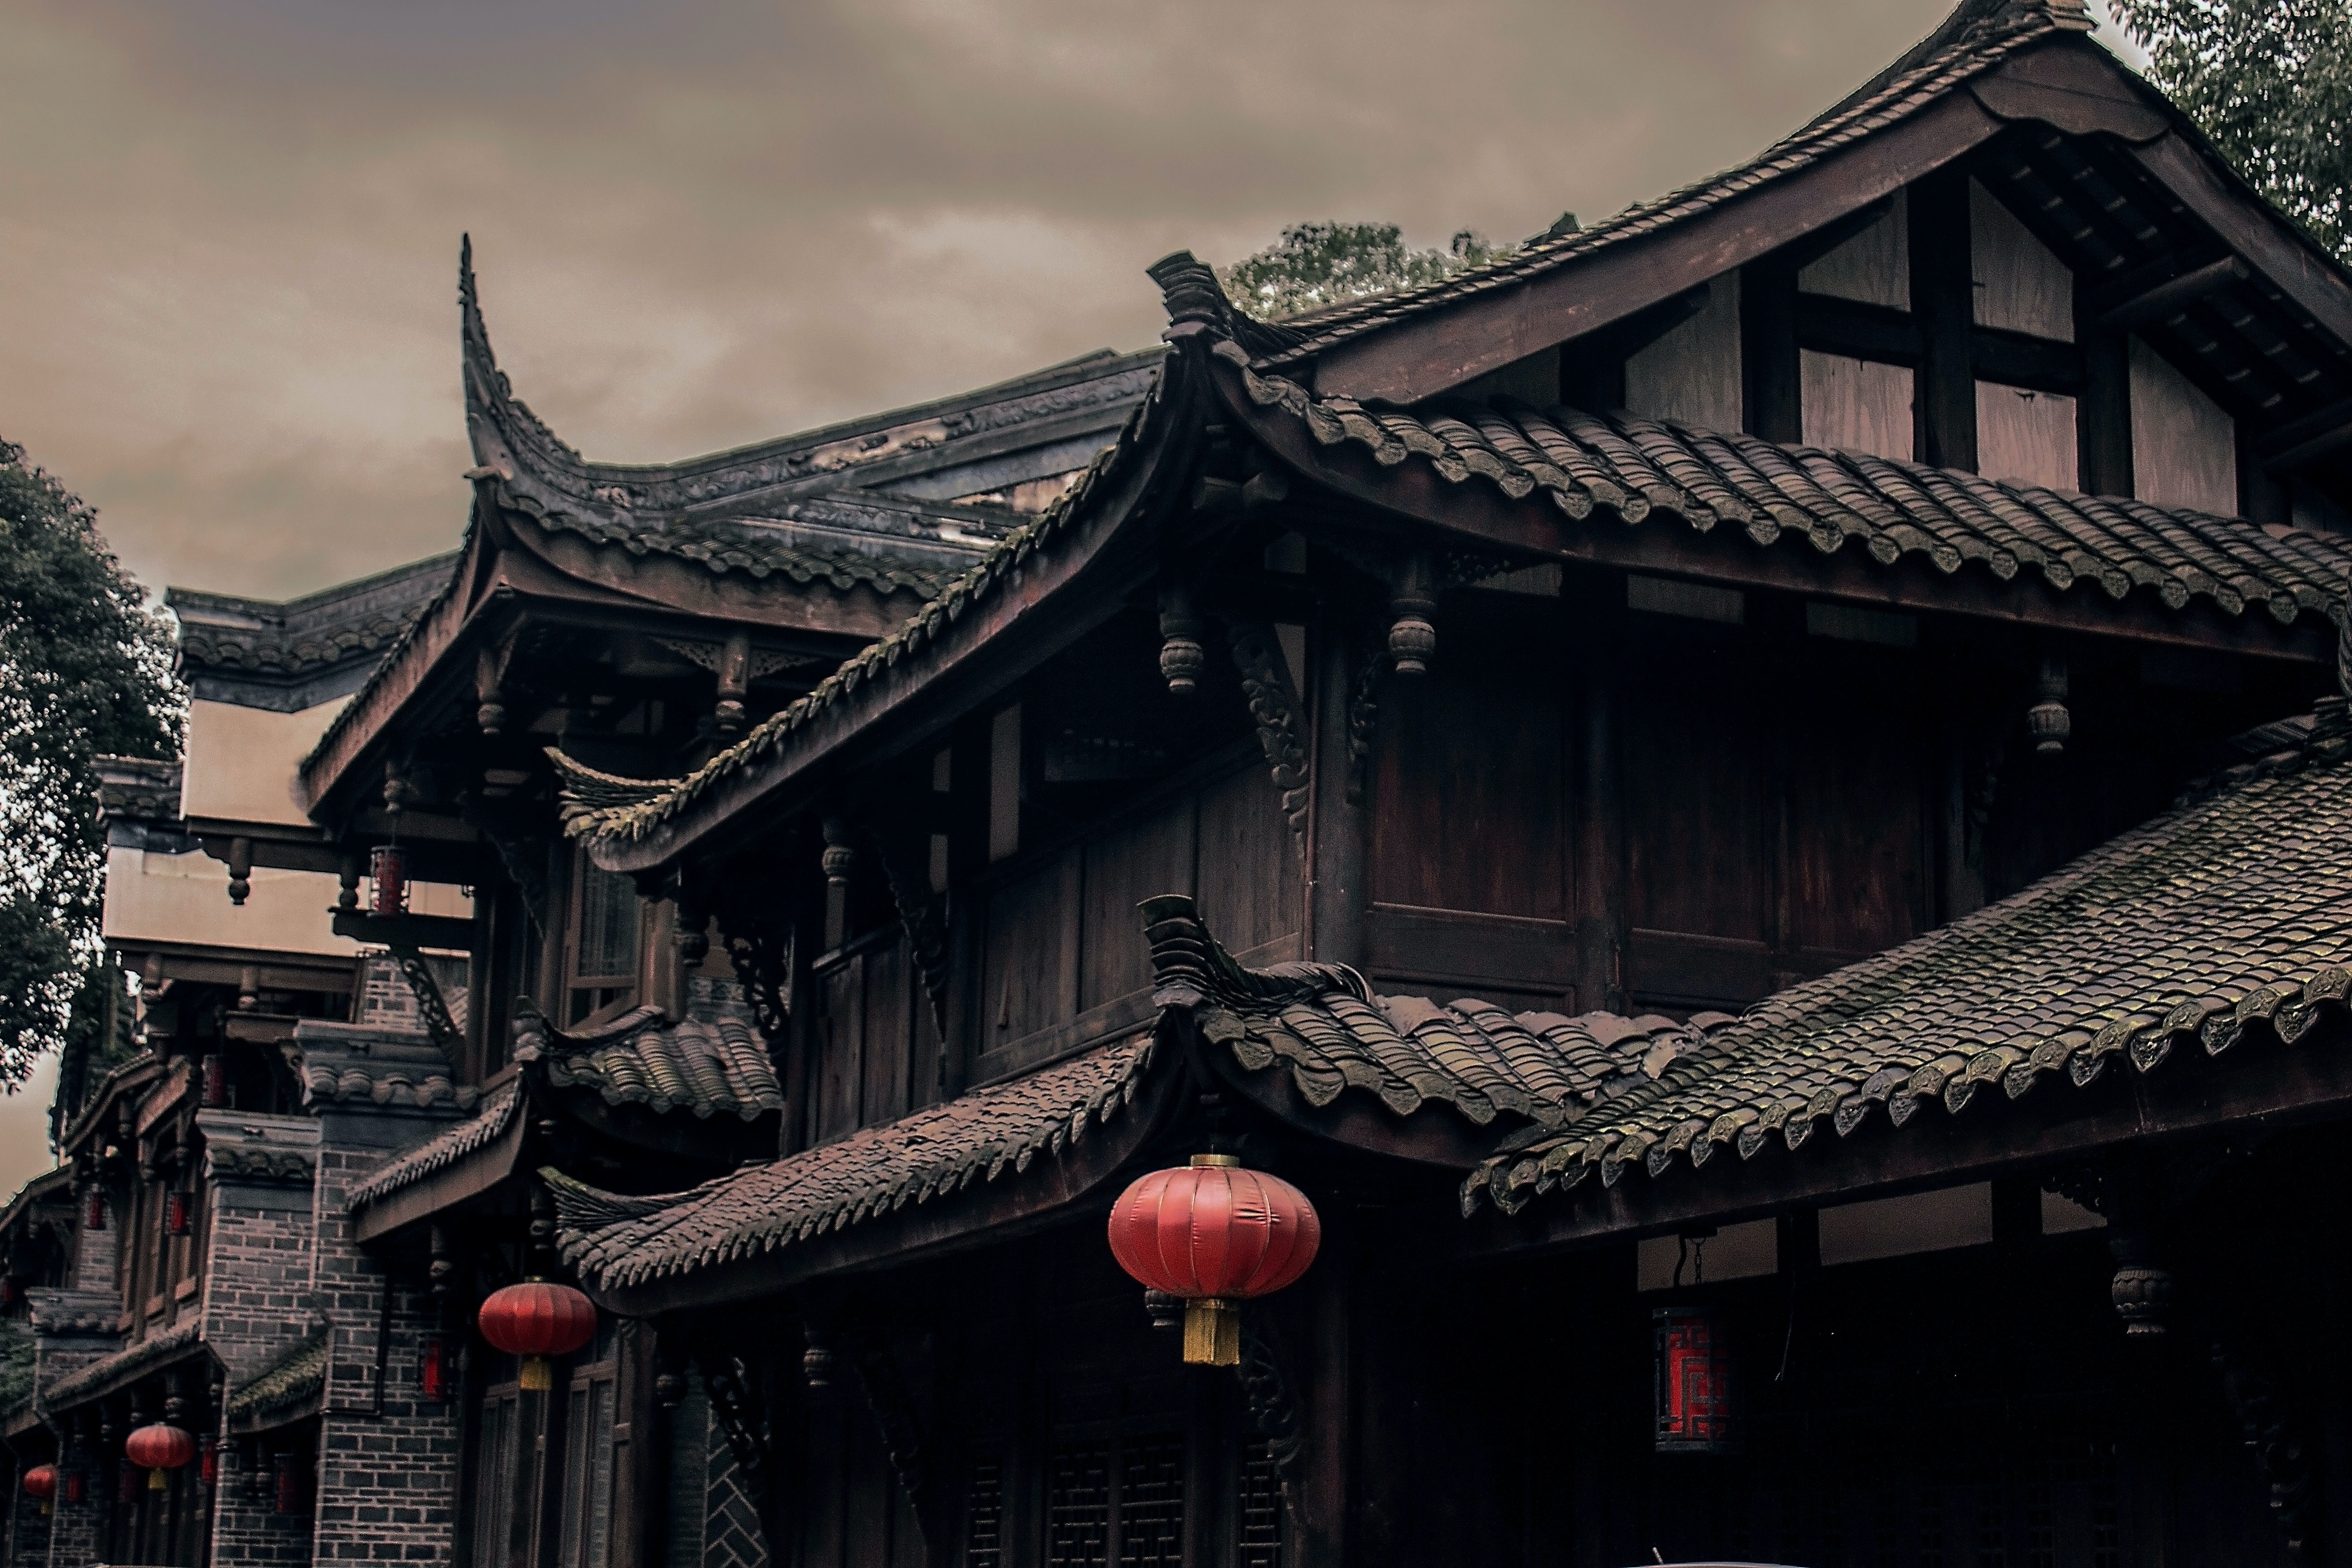 Best Free Chinese Architecture & Image · 100% Royalty Free HD Downloads